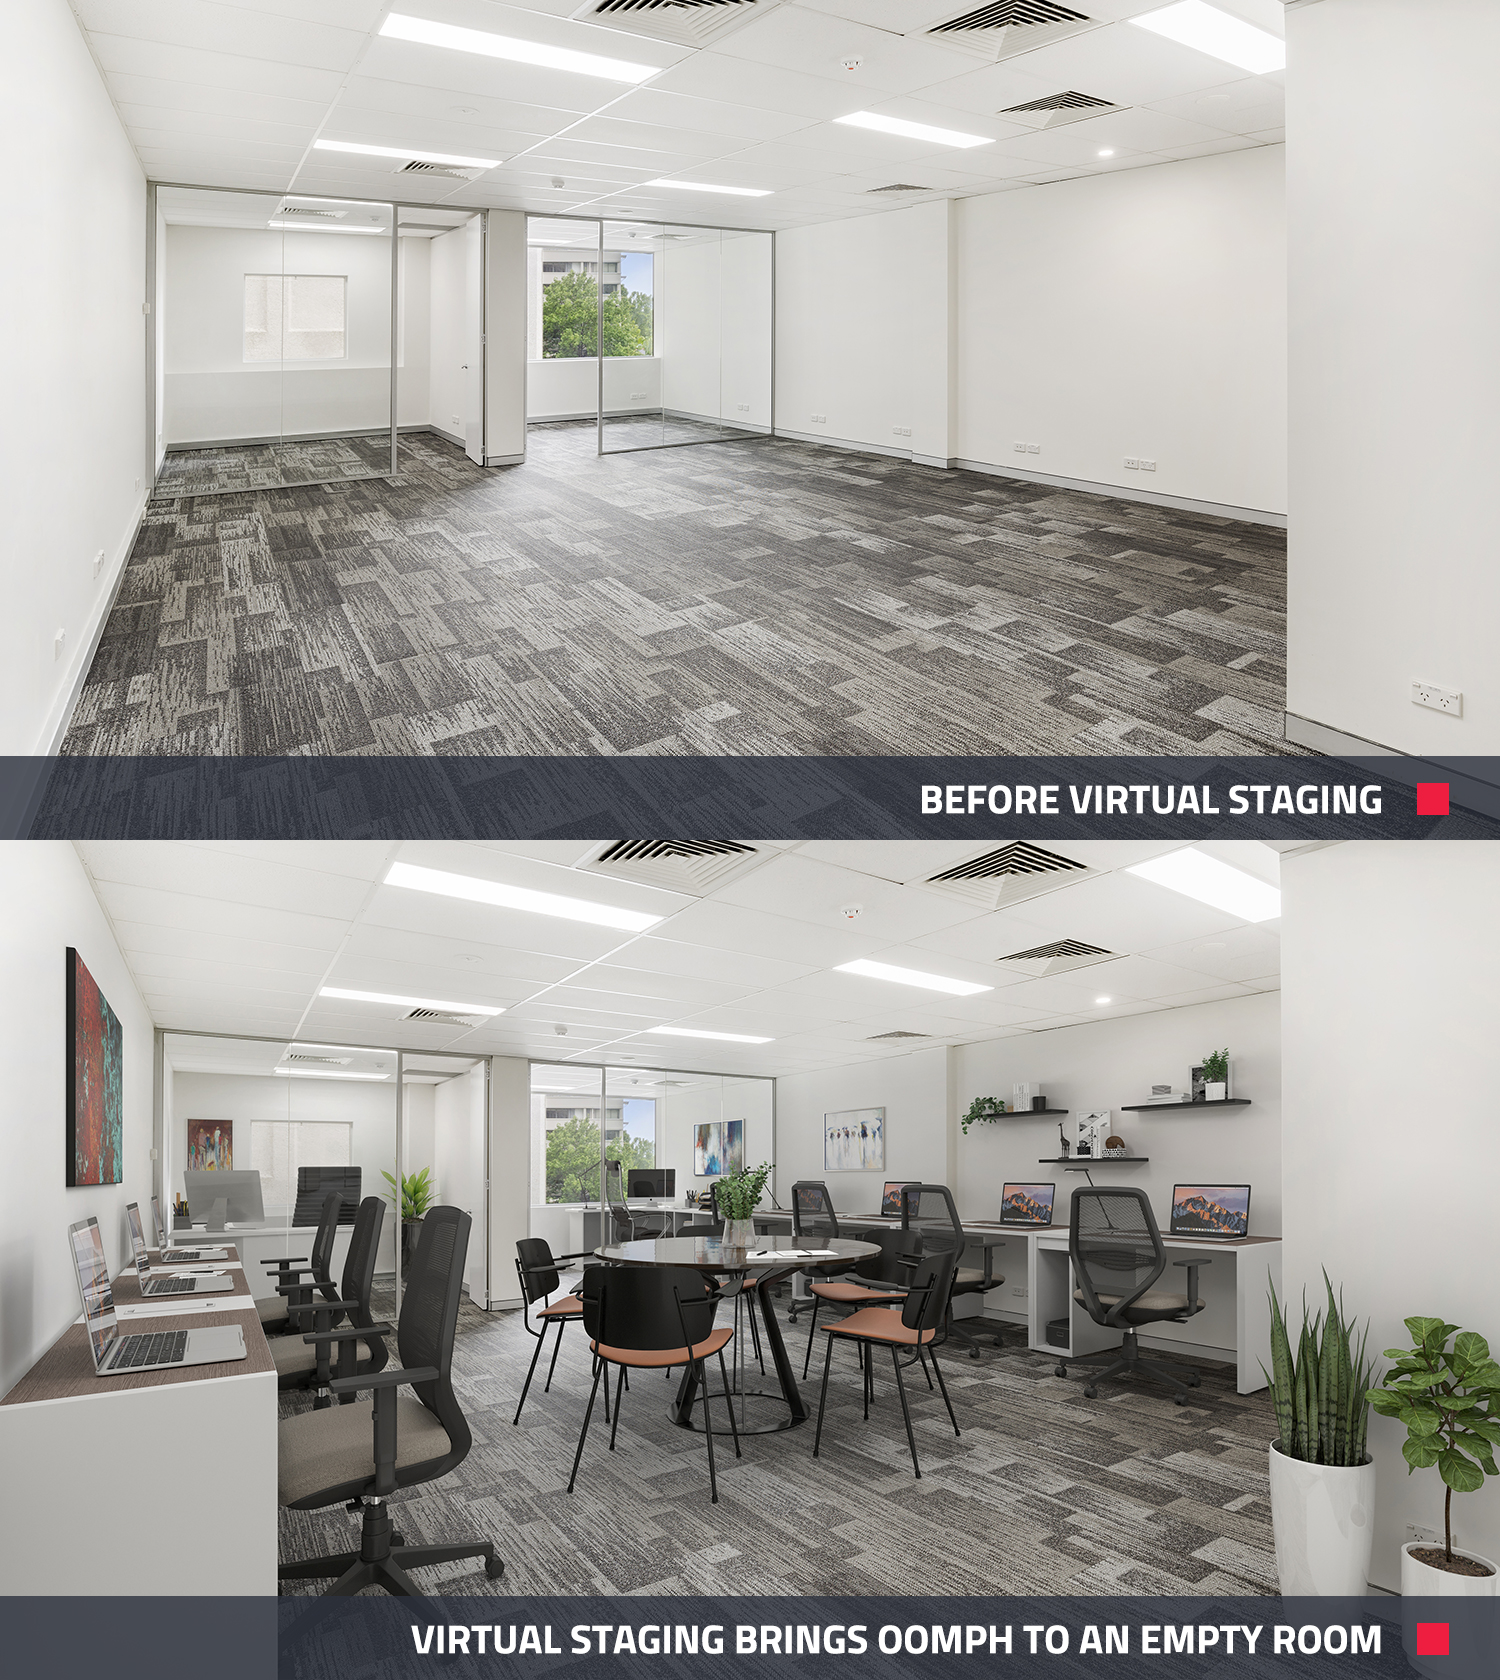 Virtual staging brings OOMPH to an empty room